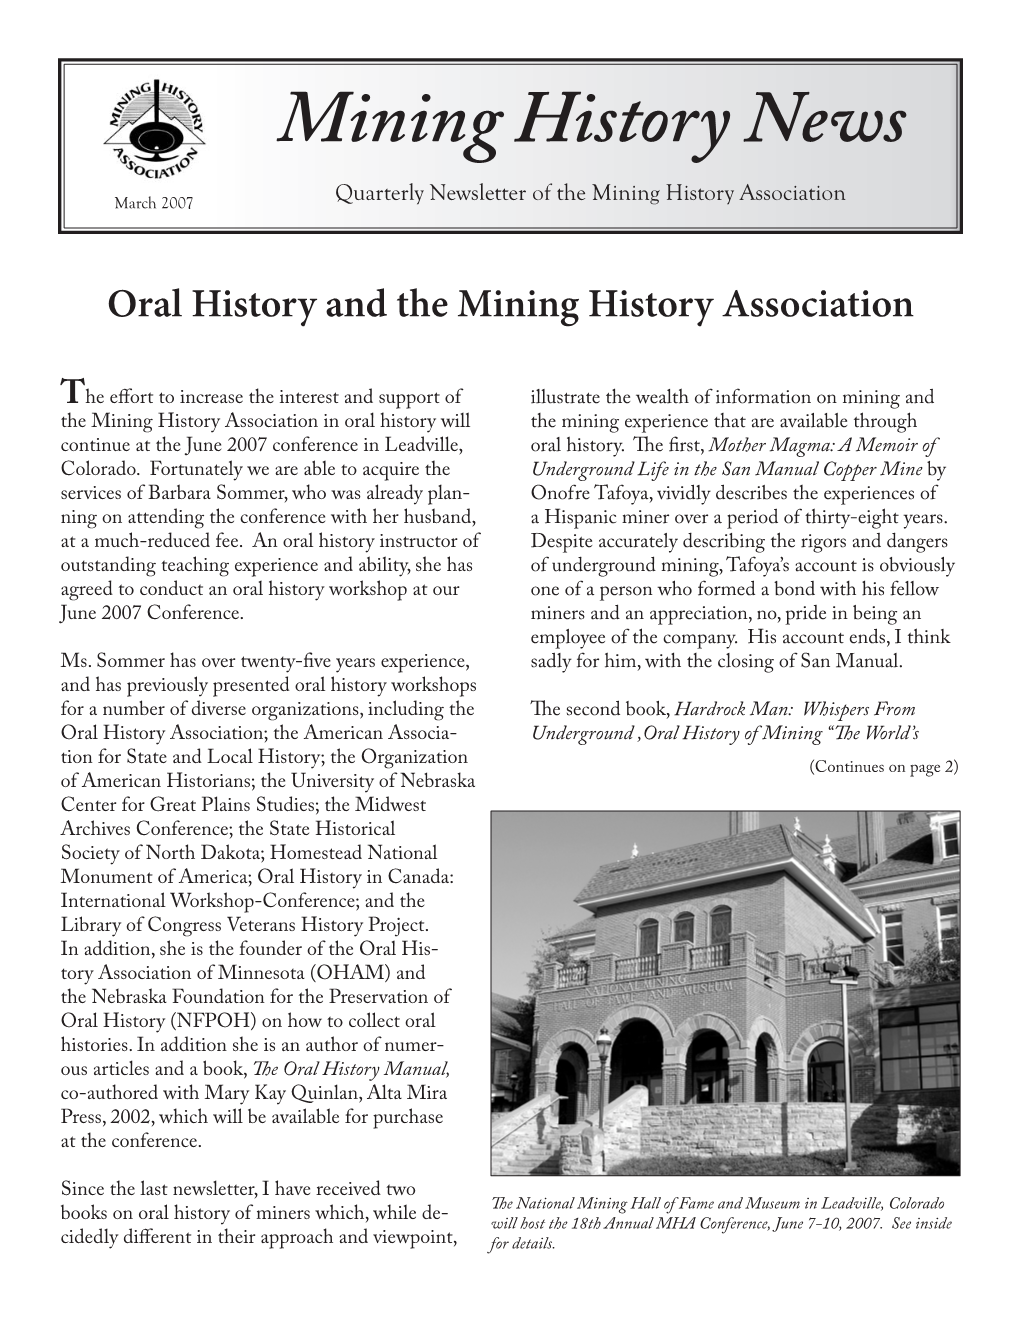 March 2007 Quarterly Newsletter of the Mining History Association